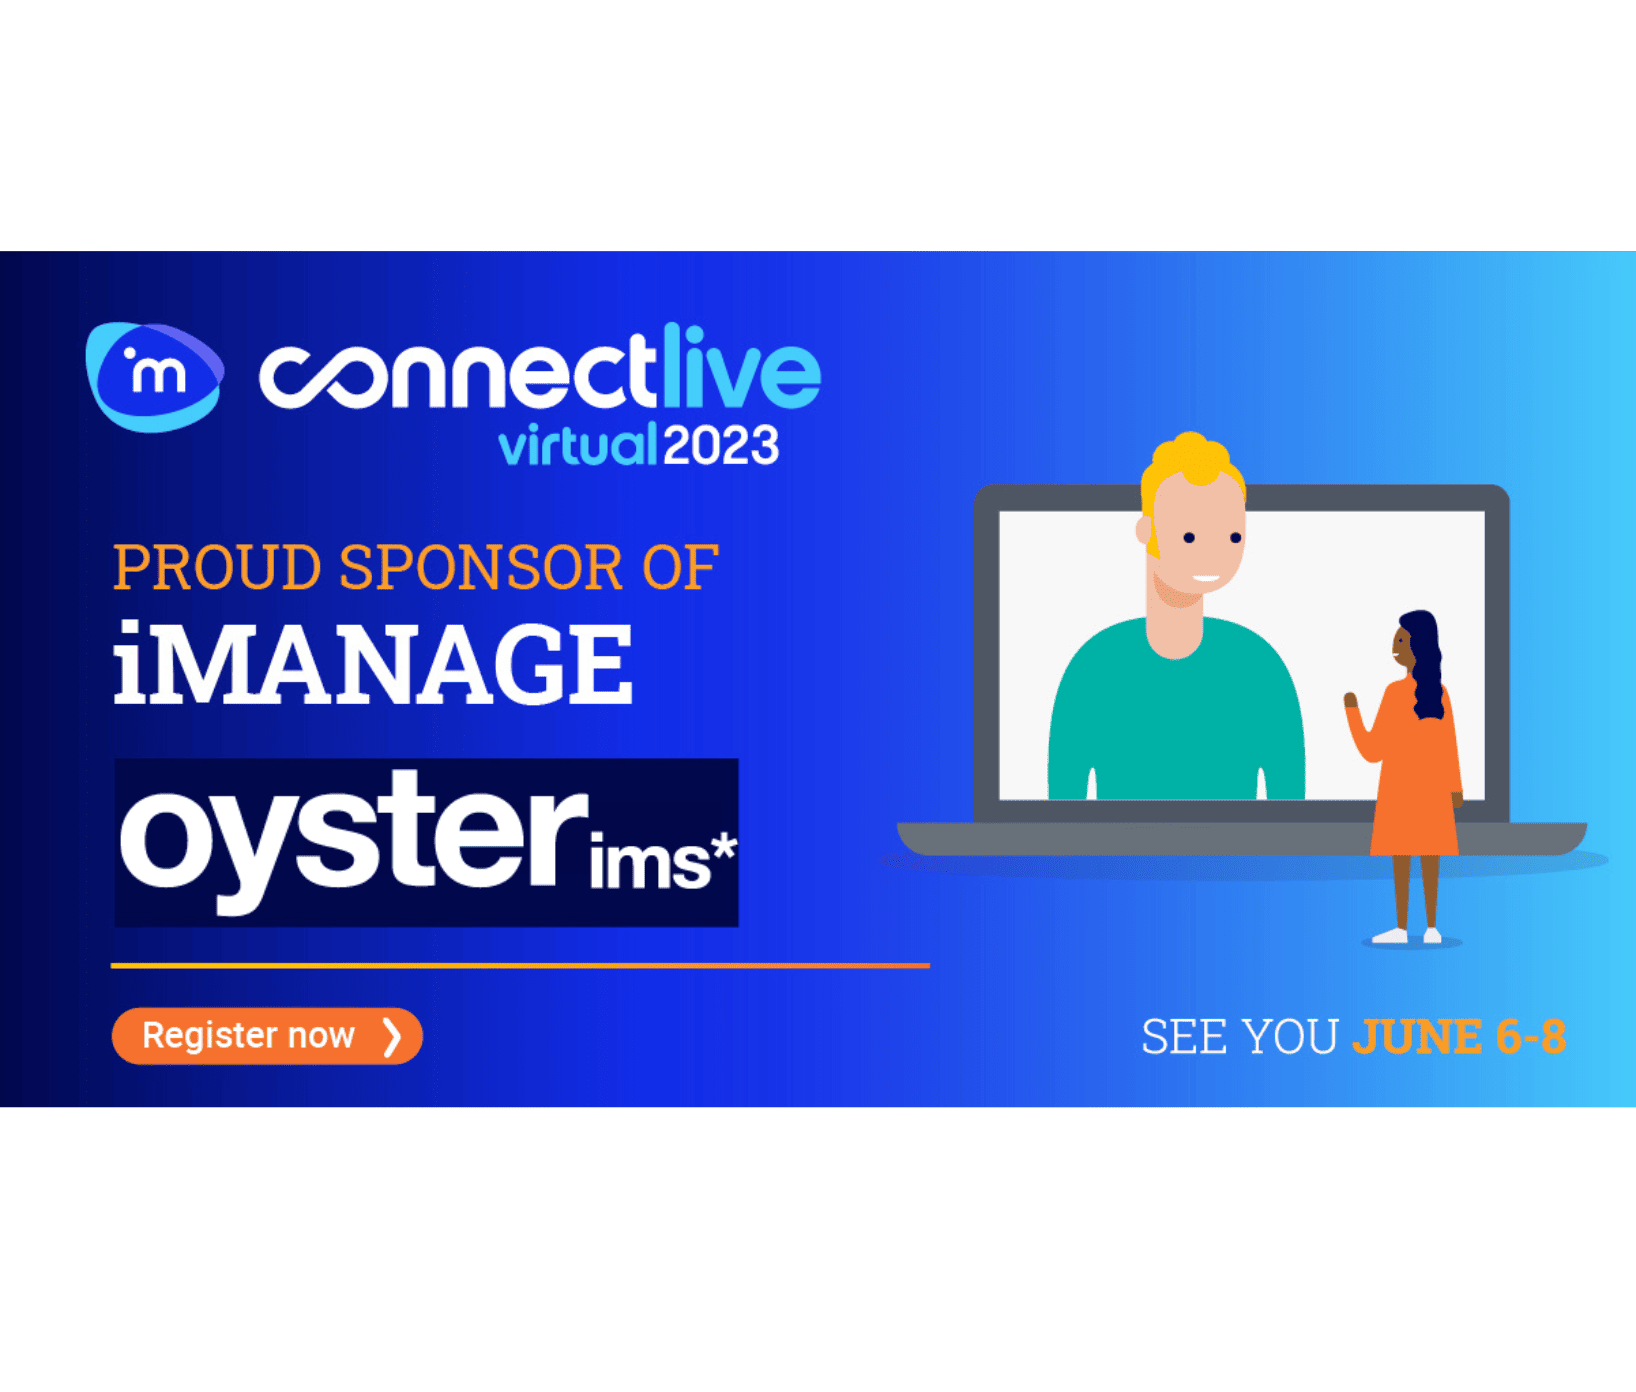 iManage ConnectLive 2023 - Oyster IMS sponsors